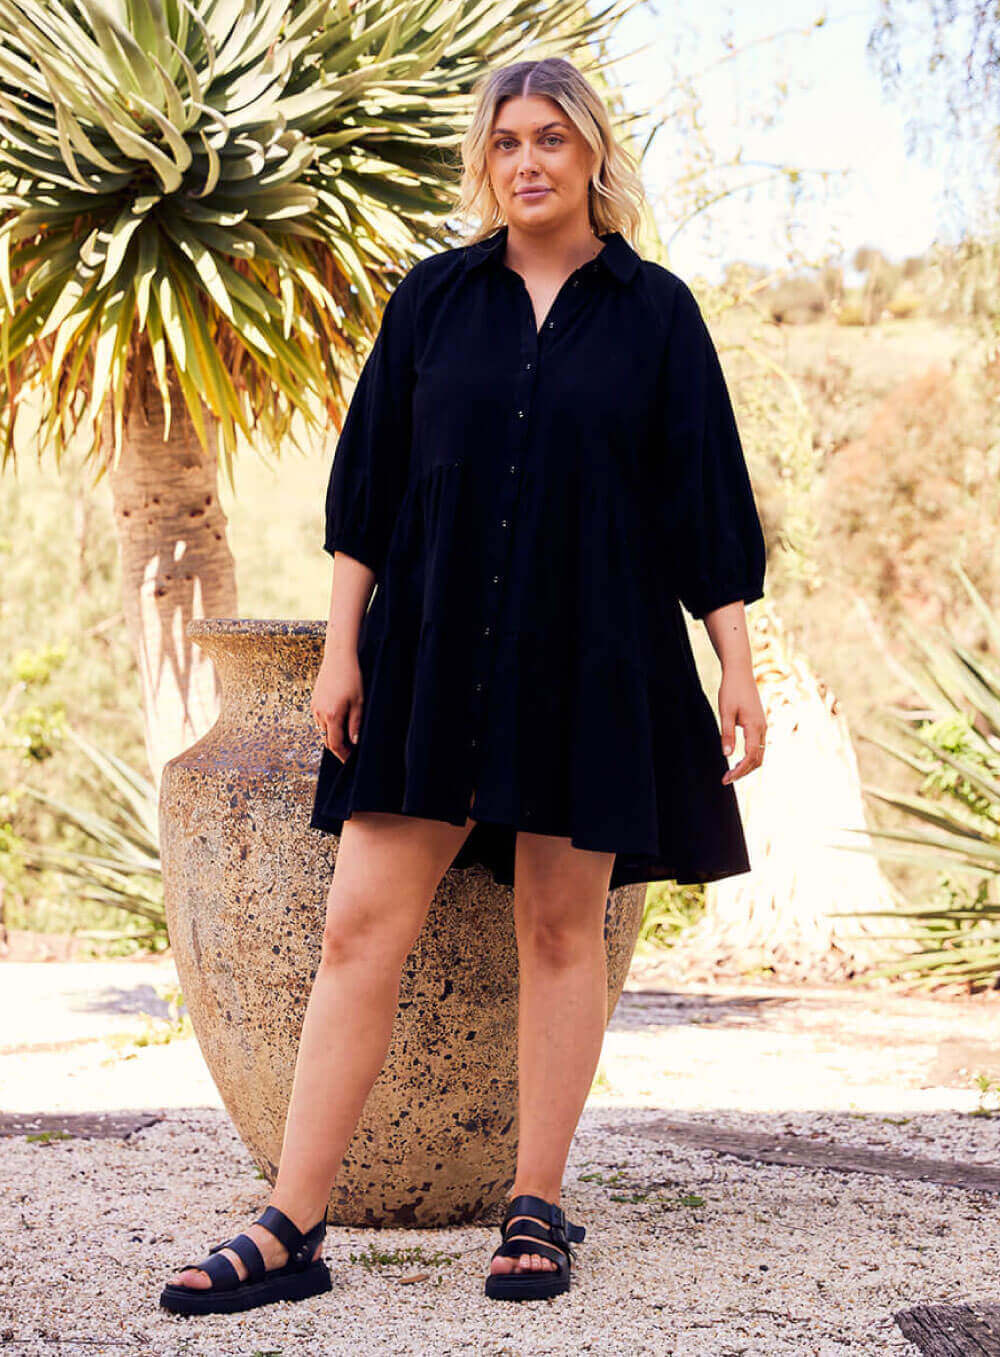 The Jasmine dress is an oversize, mini length black colour dress with 2 tiers and a 3/4 sleeve with elastic cuff